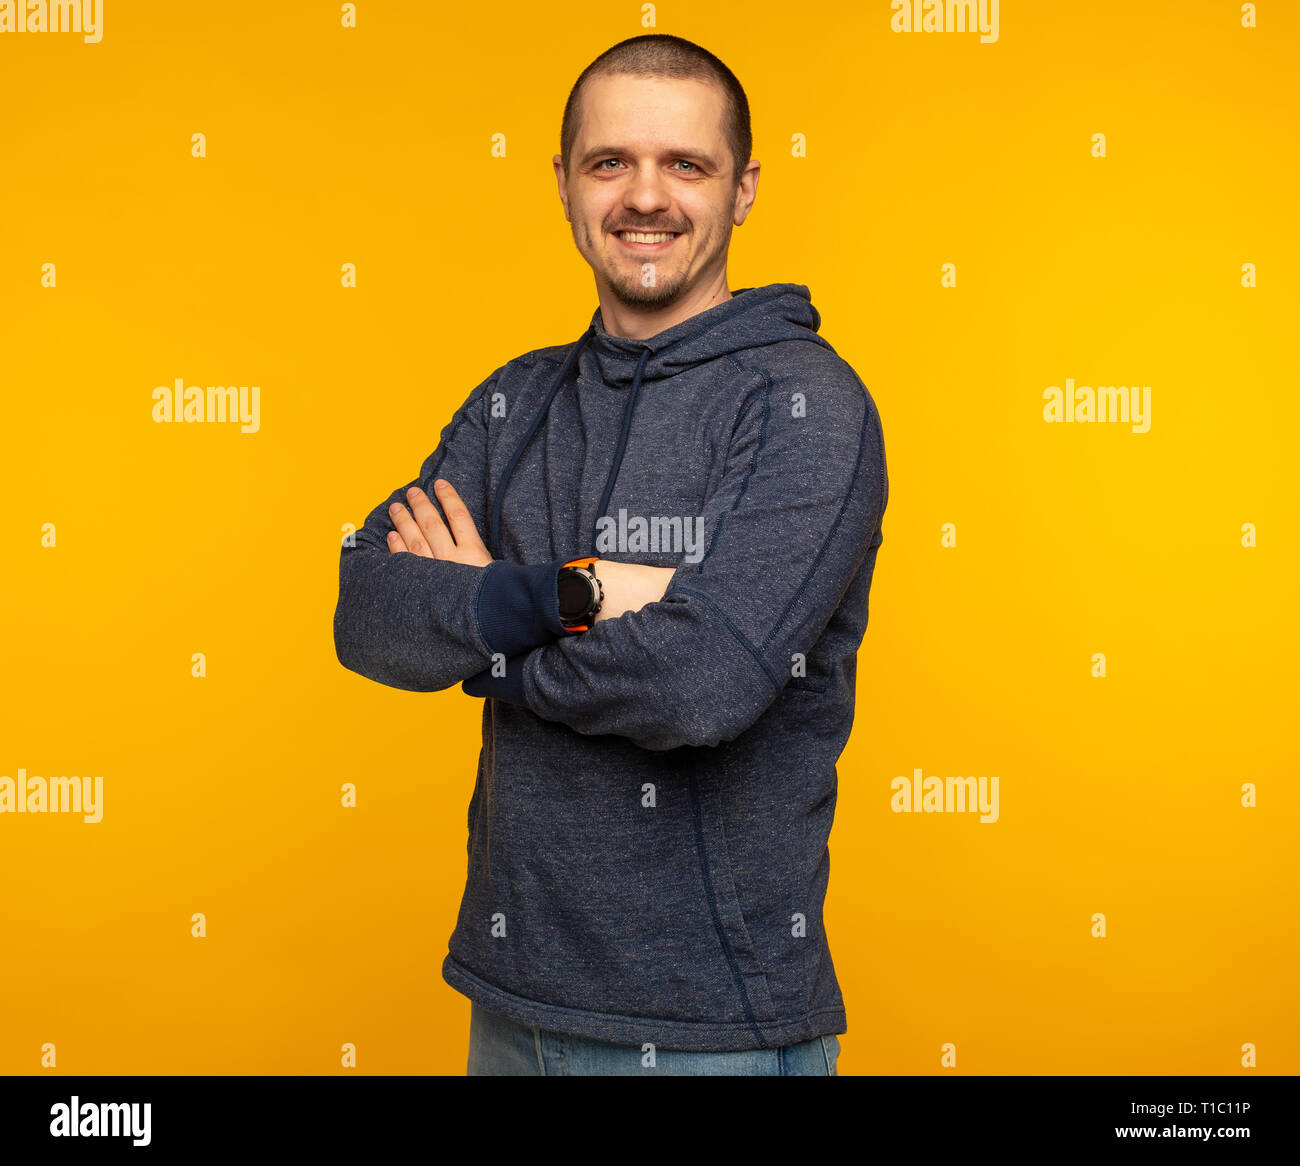 Man in hoodie with crossed arms smiling and looking in camera Stock Photo